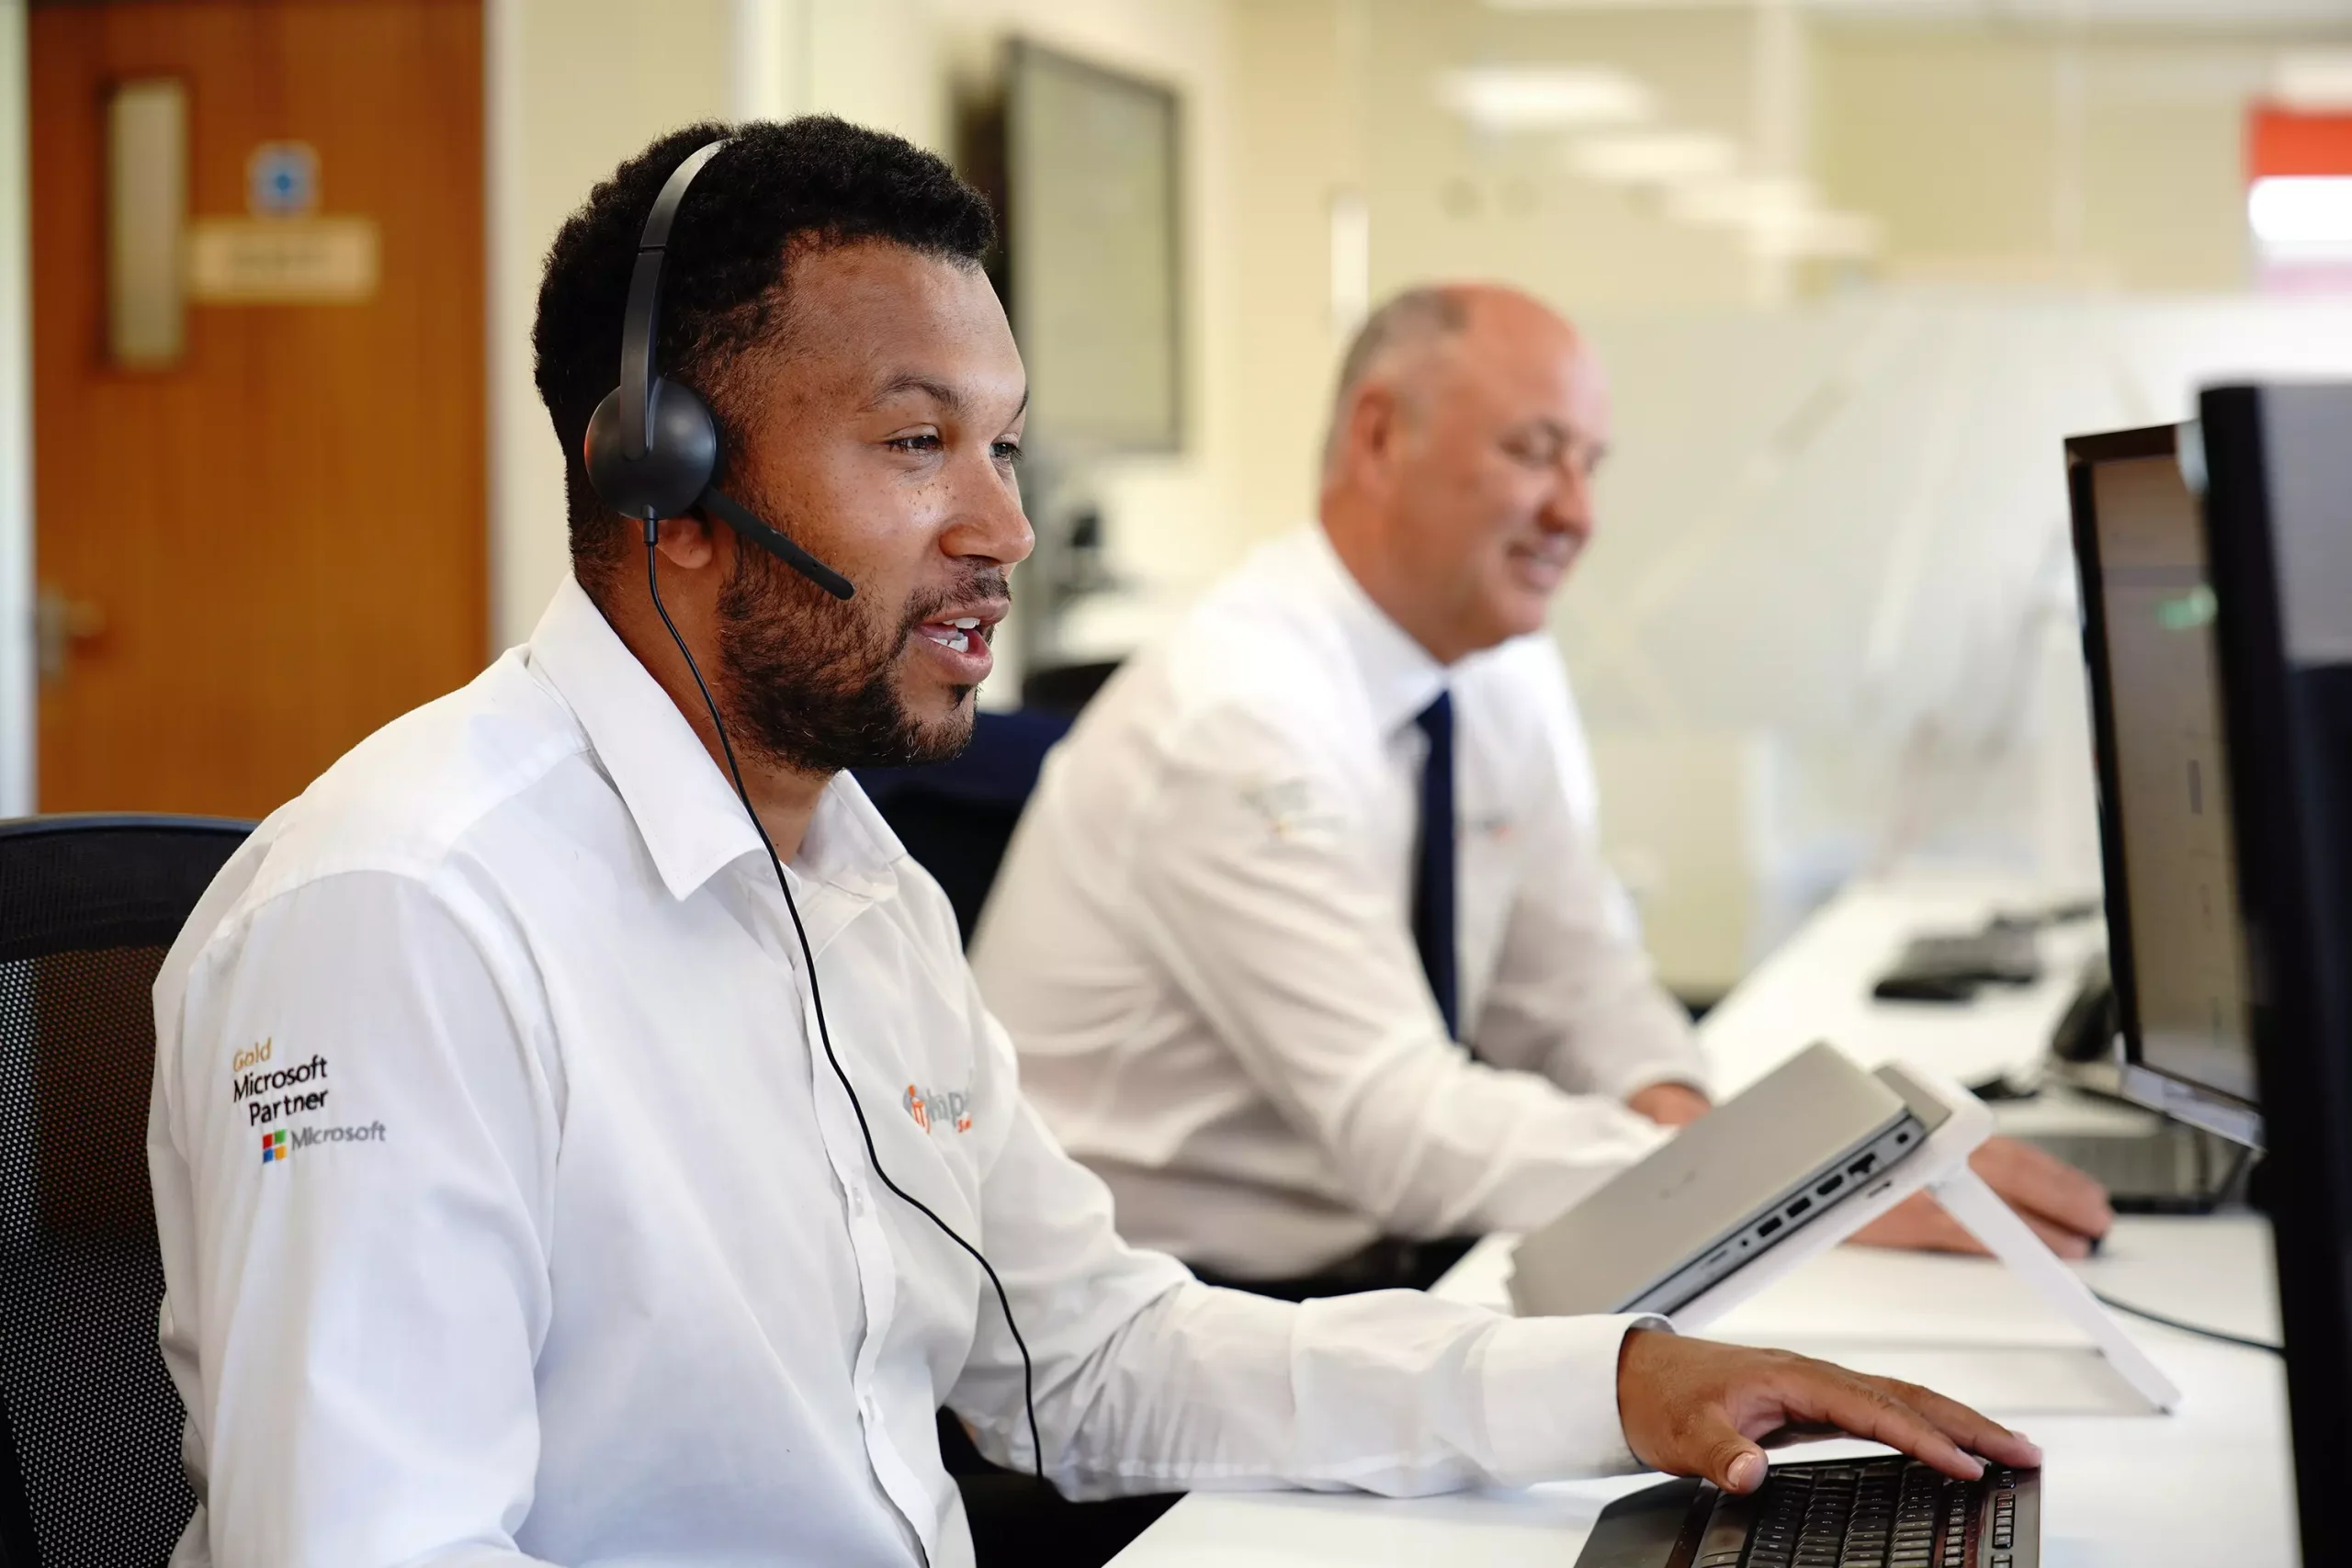 Impact IT Solutions sales engineer at a desk on the phone with a head-set to a customer in the South West